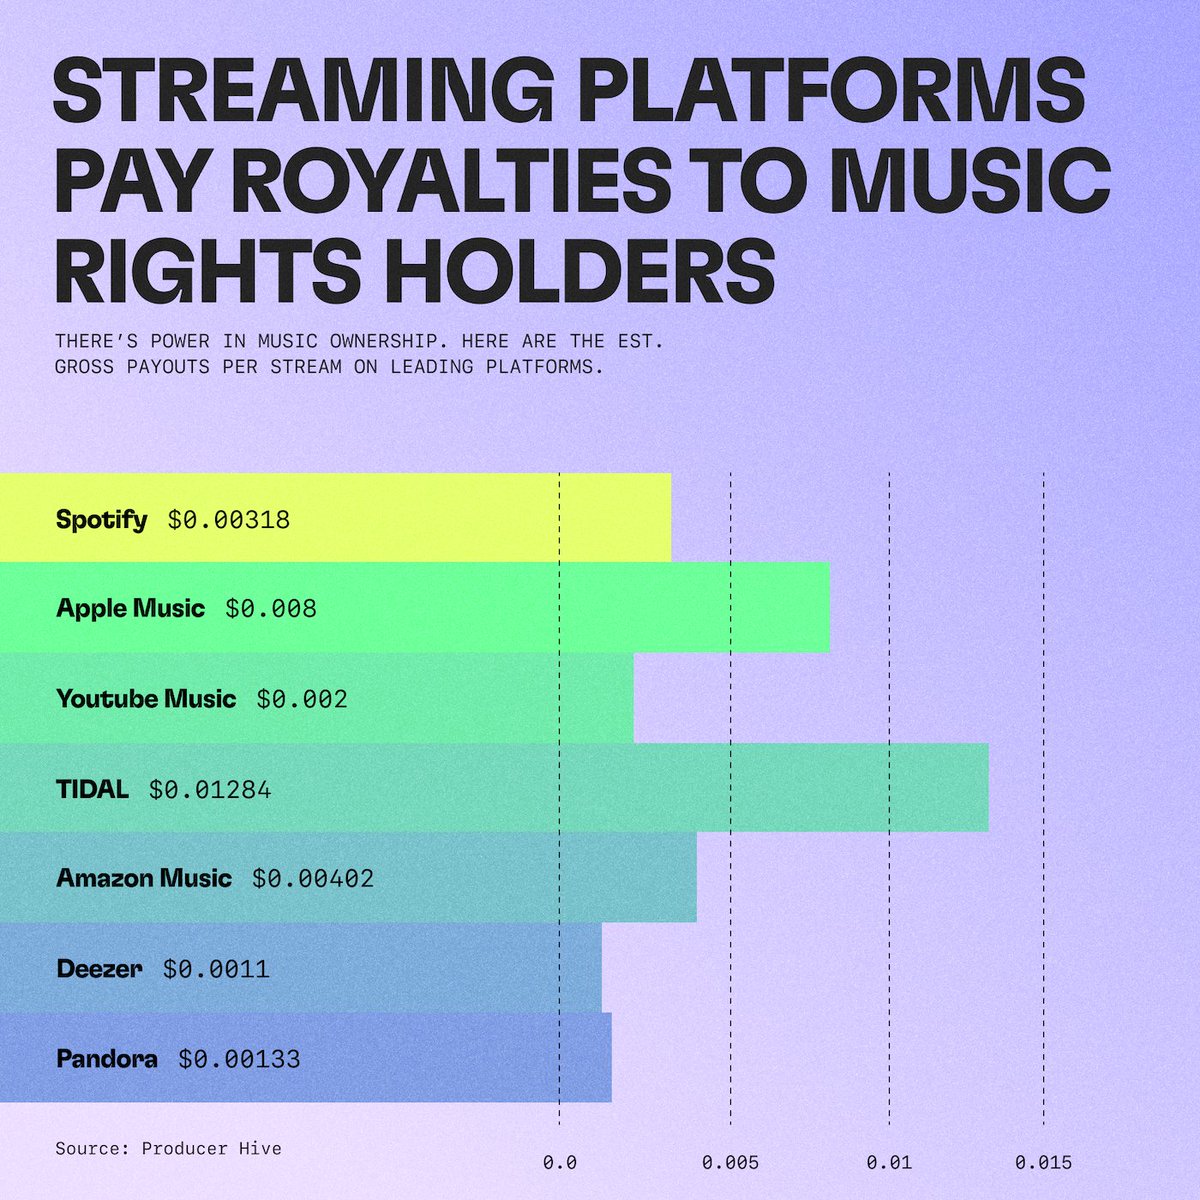 In the US, streaming has taken over. Yet artists only receive a small portion of those funds — mostly due to power imbalances and traditional deal structures which tend to be unfavorable toward artists.